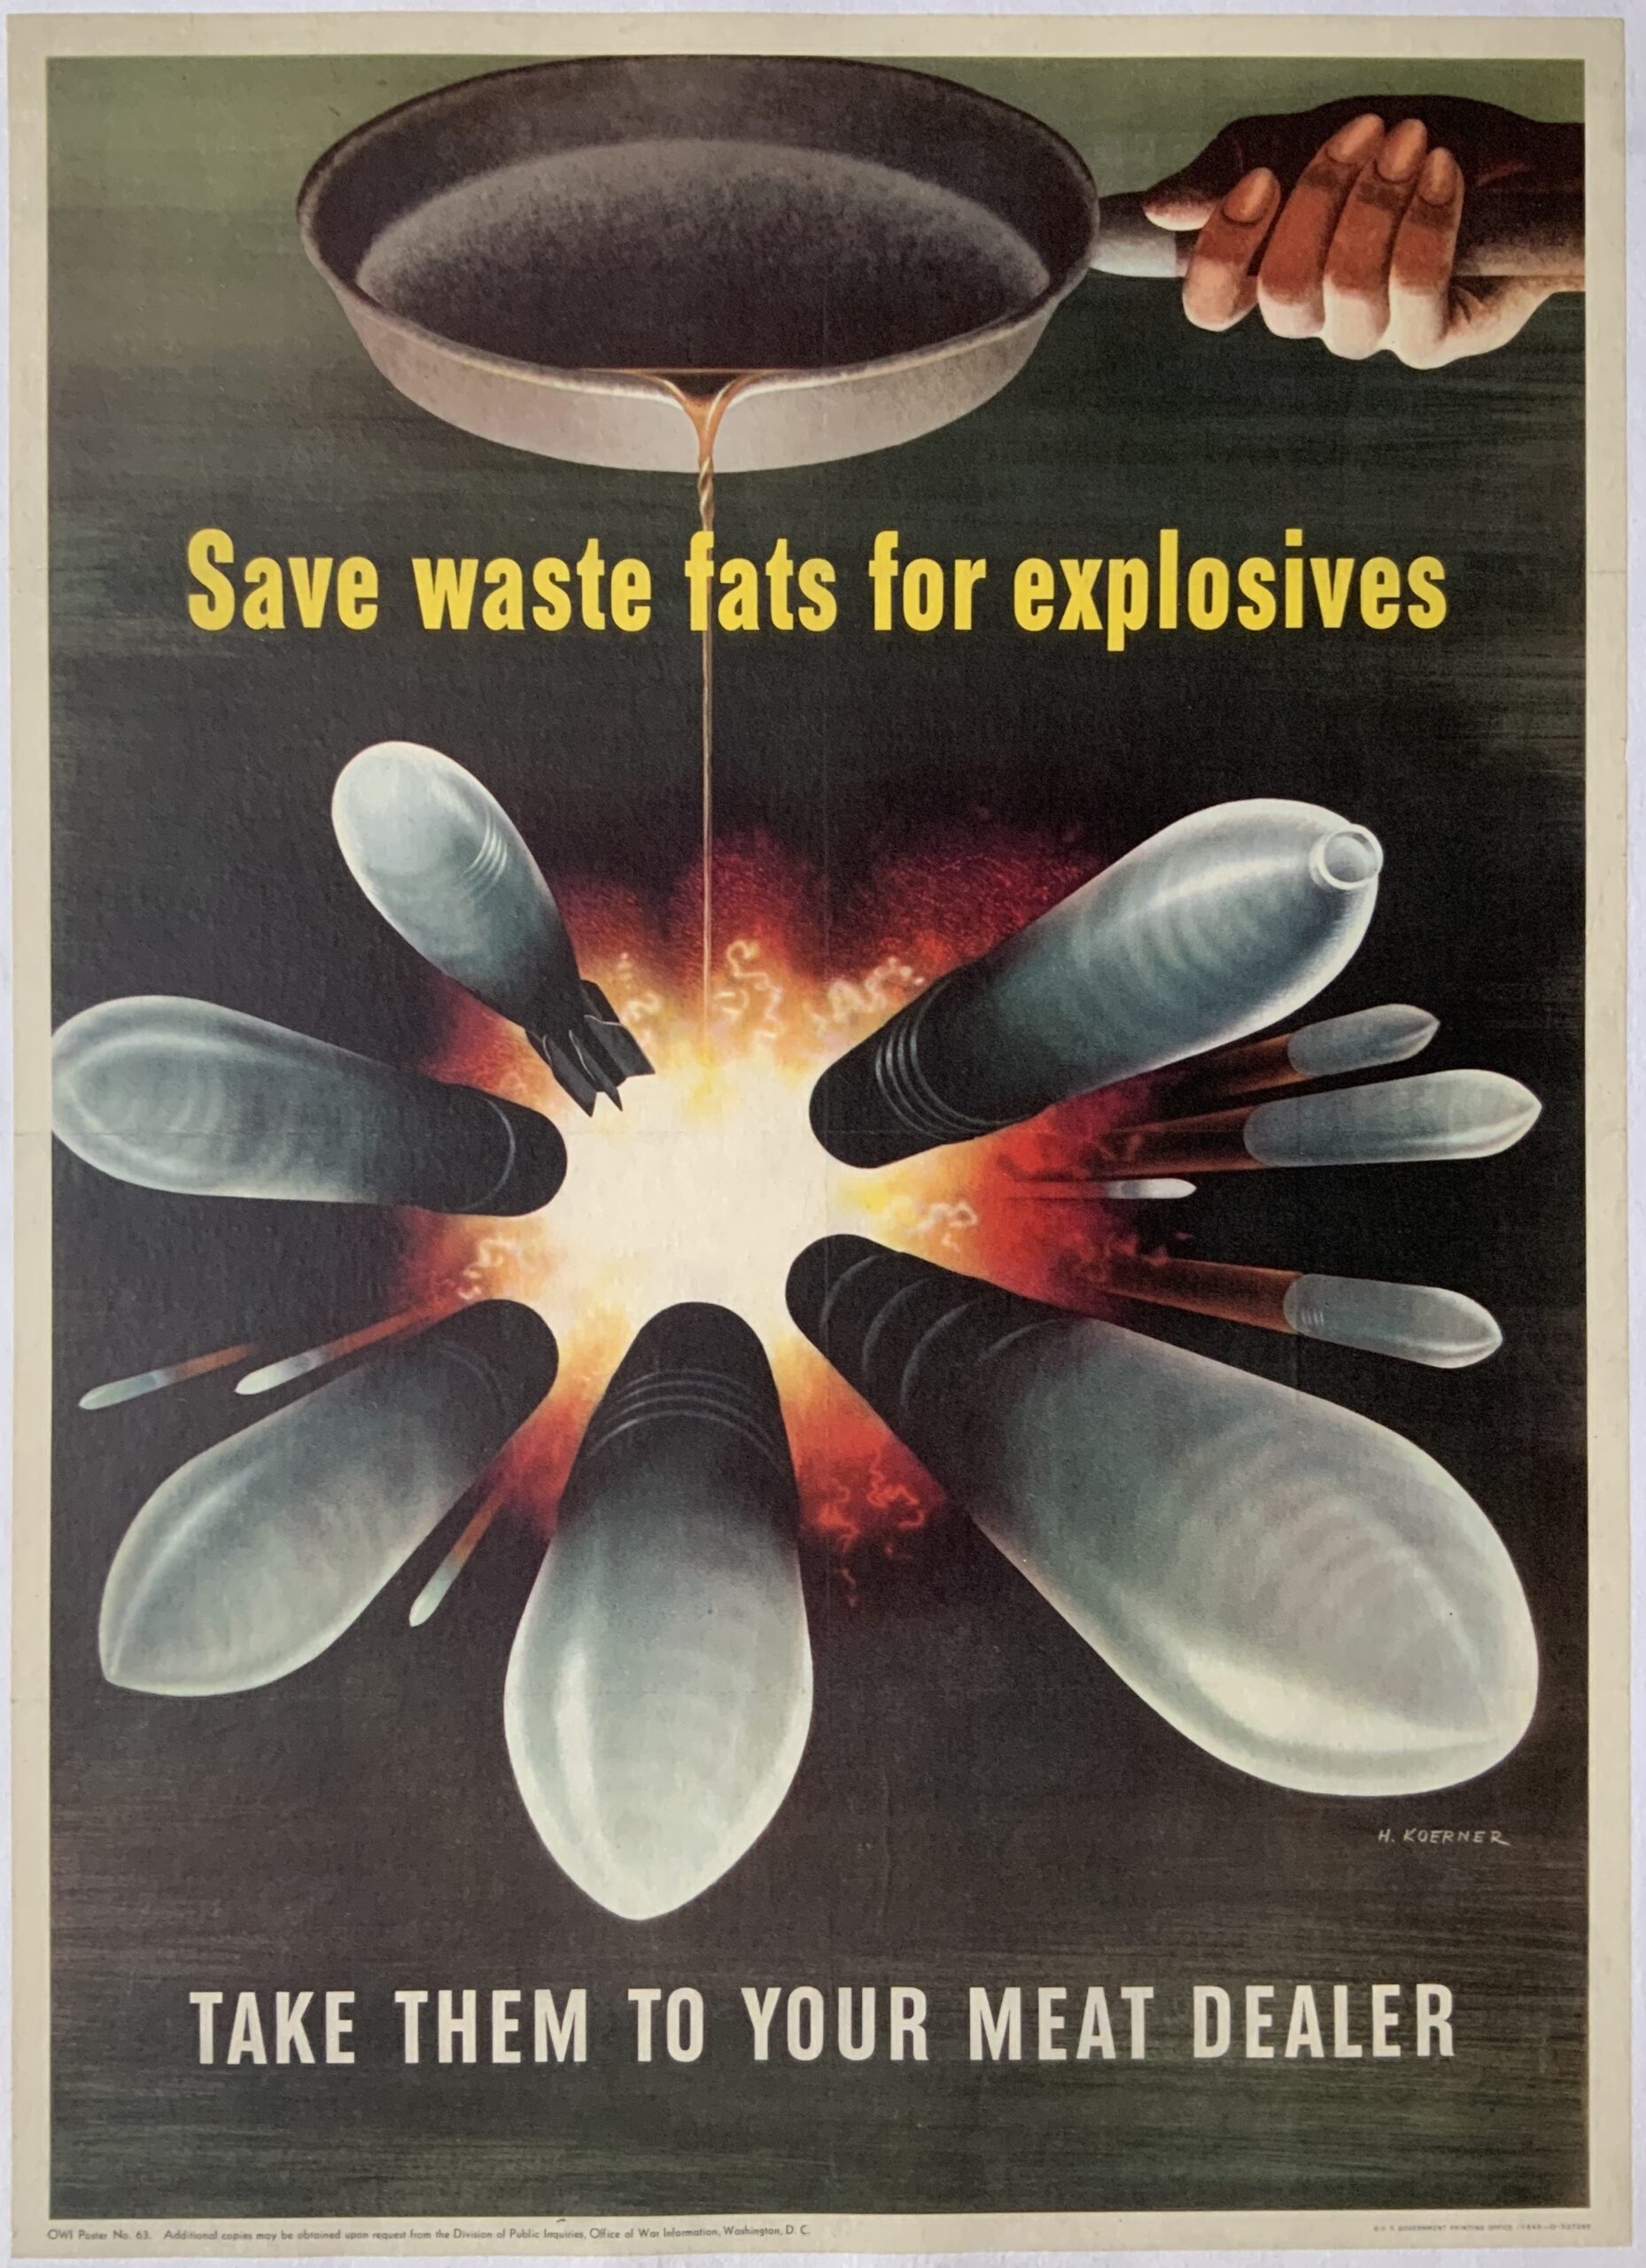 P1961 SAVE WASTE FATS FOR EXPLOSIVES - TAKE THEM TO YOUR MEAT DEALER